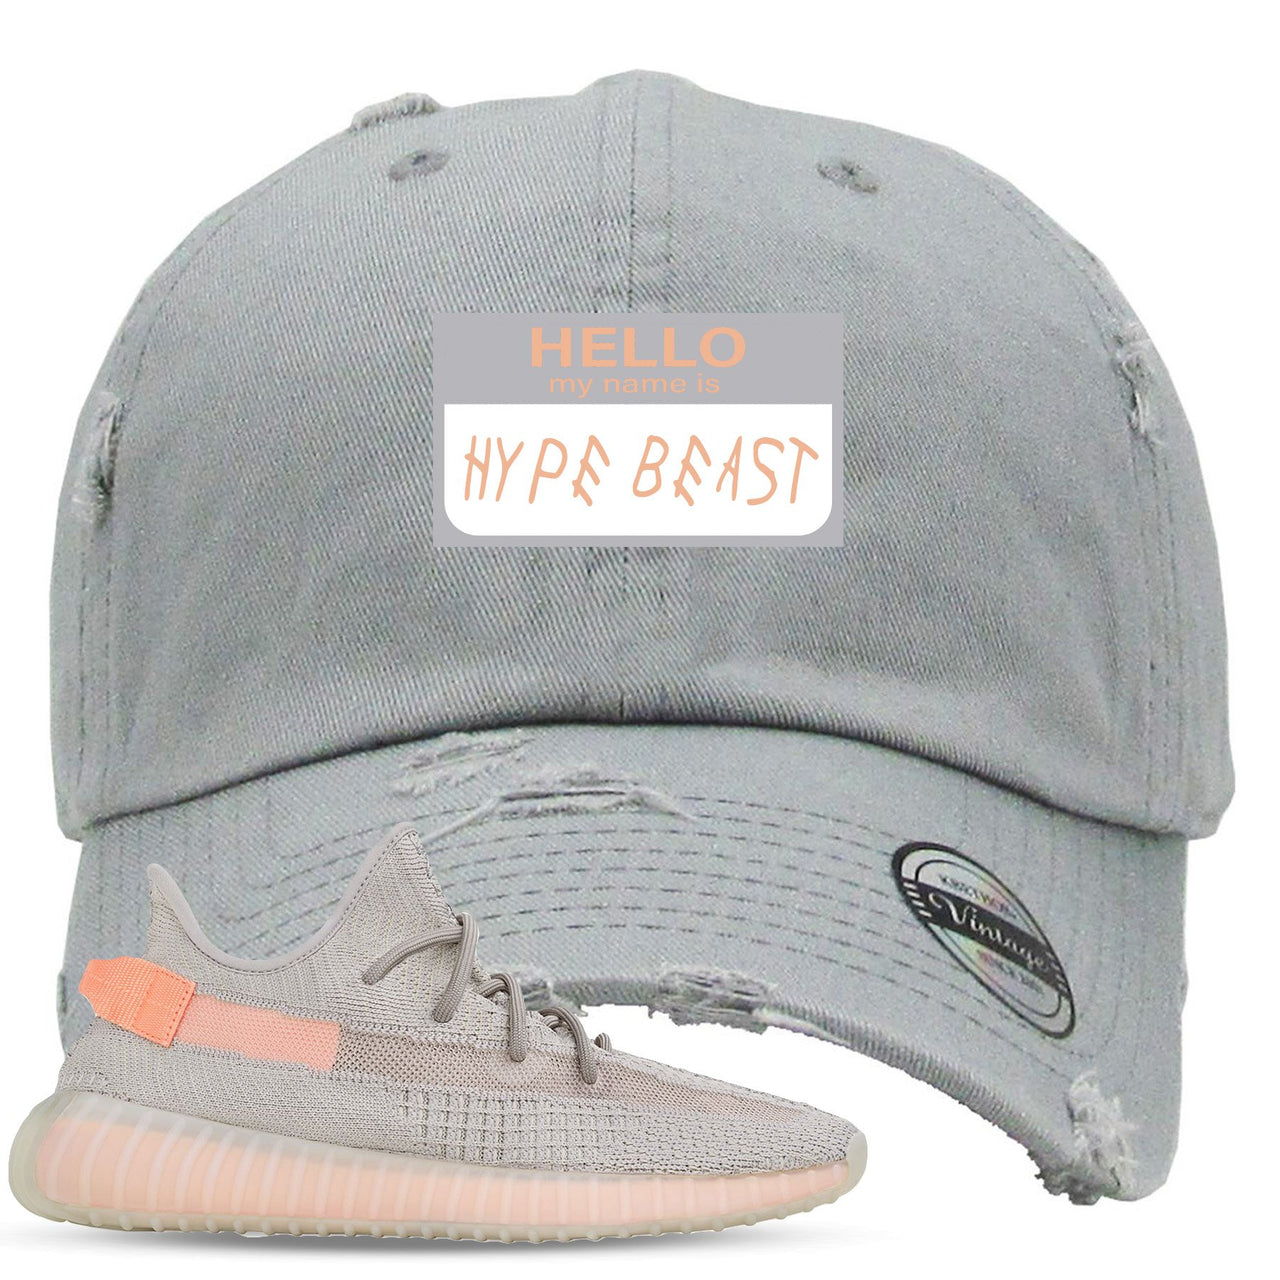 True Form v2 350s Distressed Dad Hat | Hello My Name Is Hype Beast Woe, Light Gray